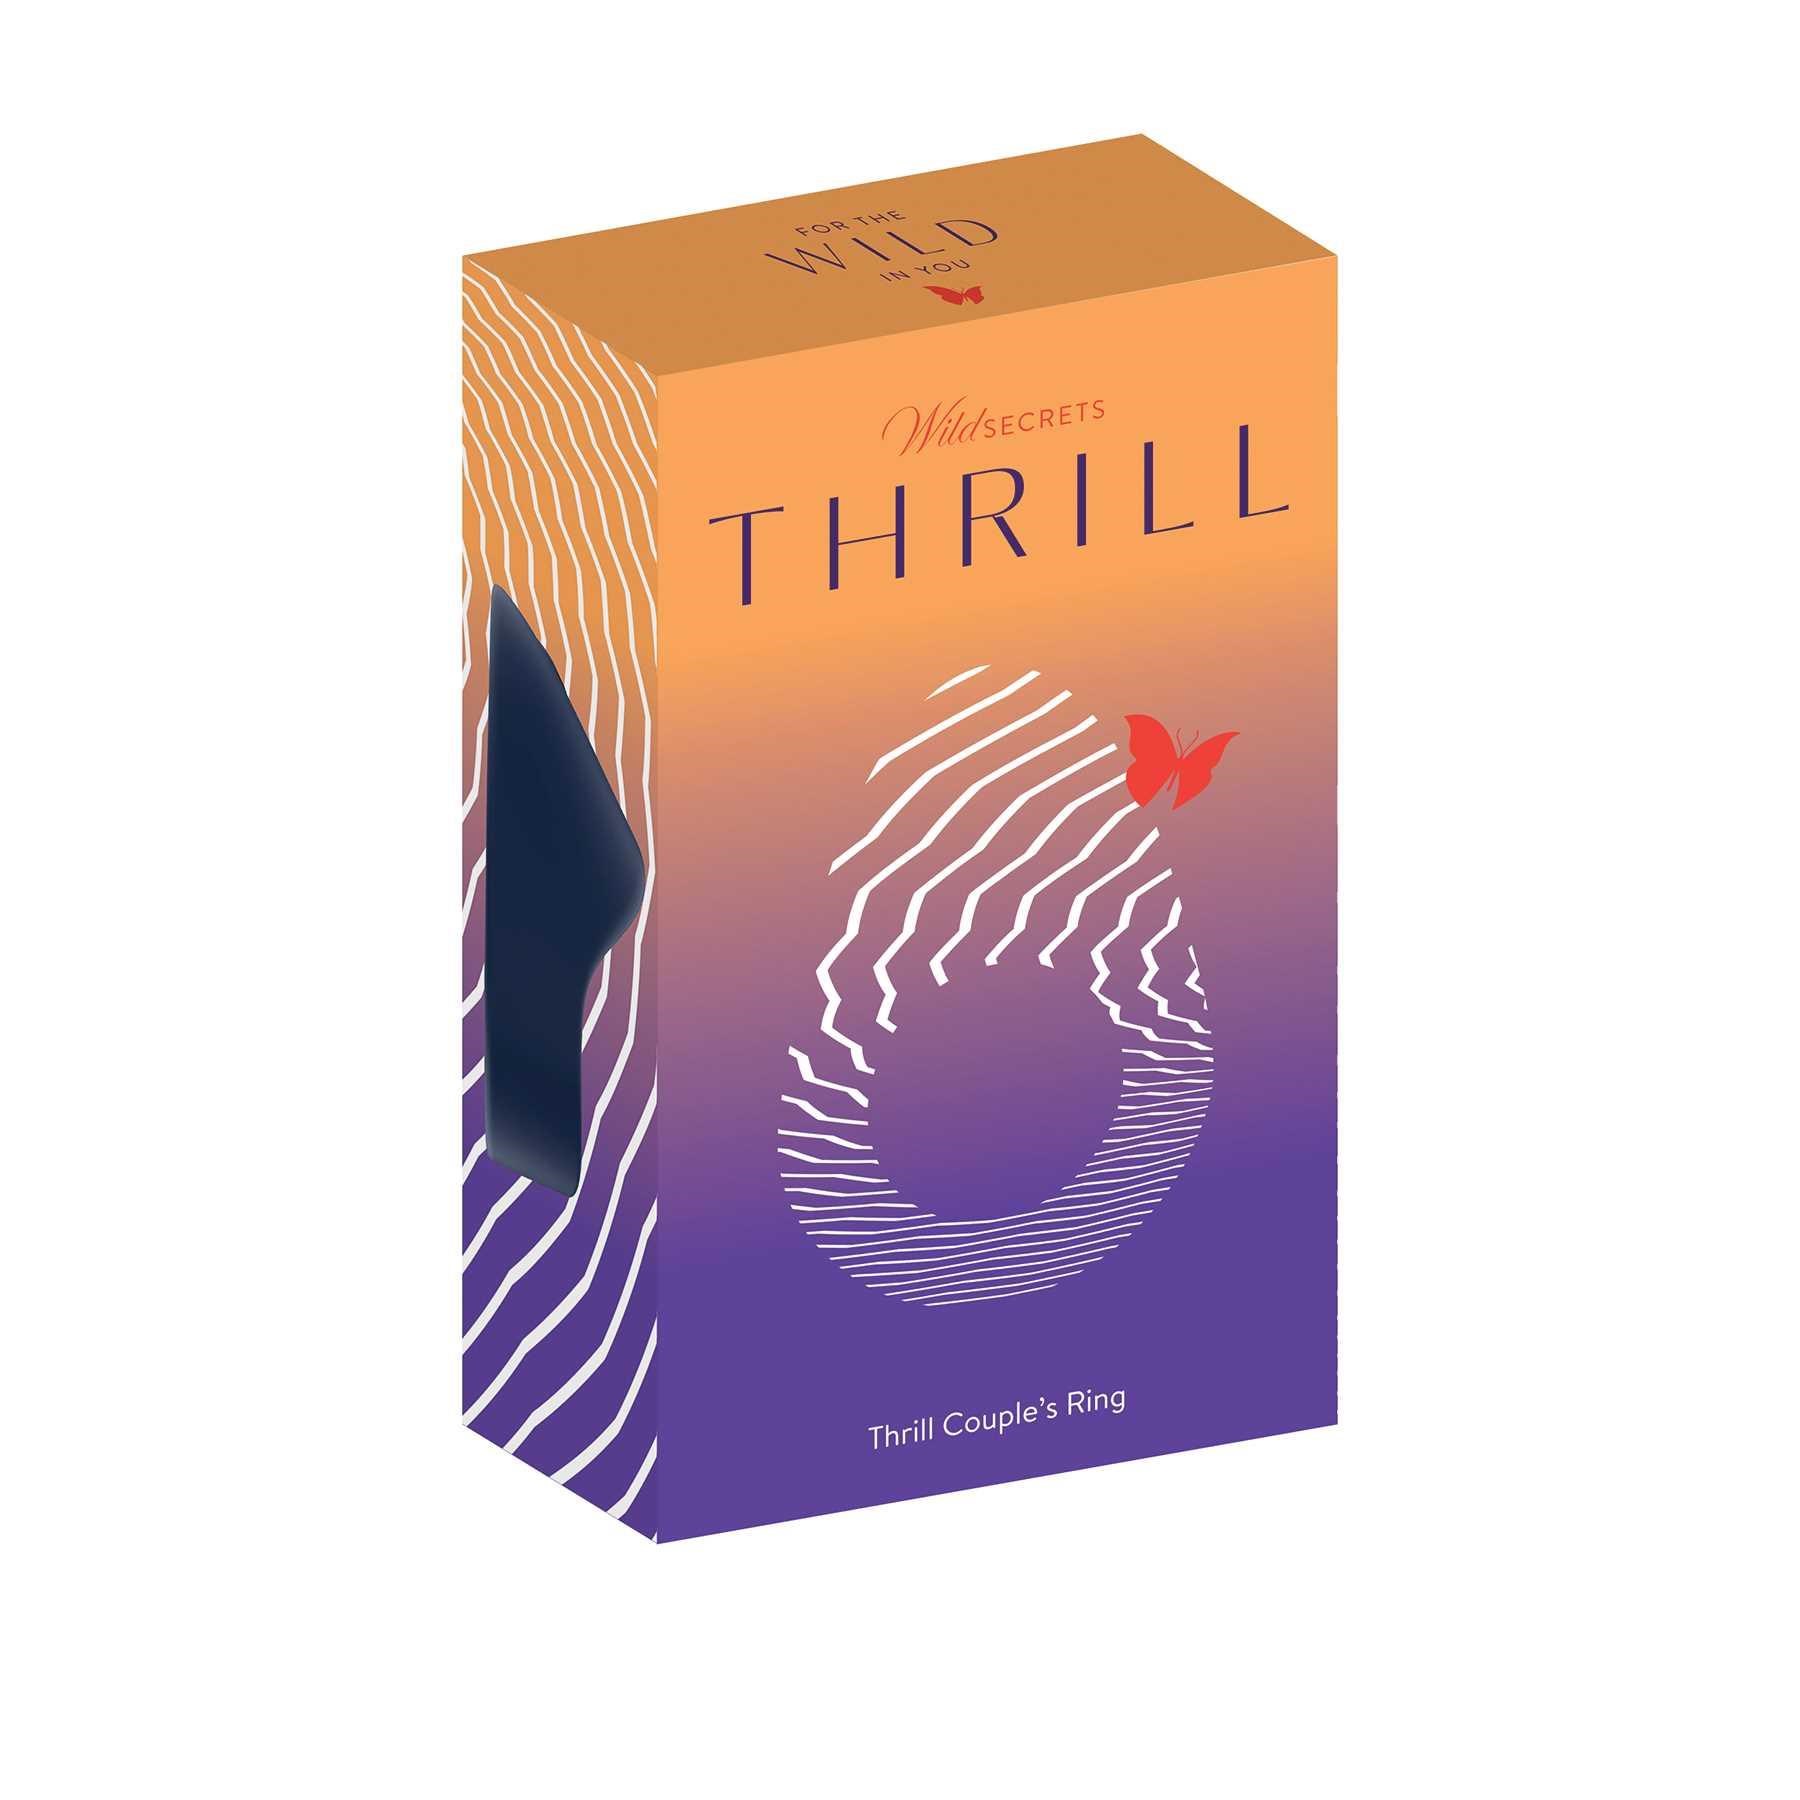 Wild Secrets Thrill Vibrating Couples Ring front box packaging